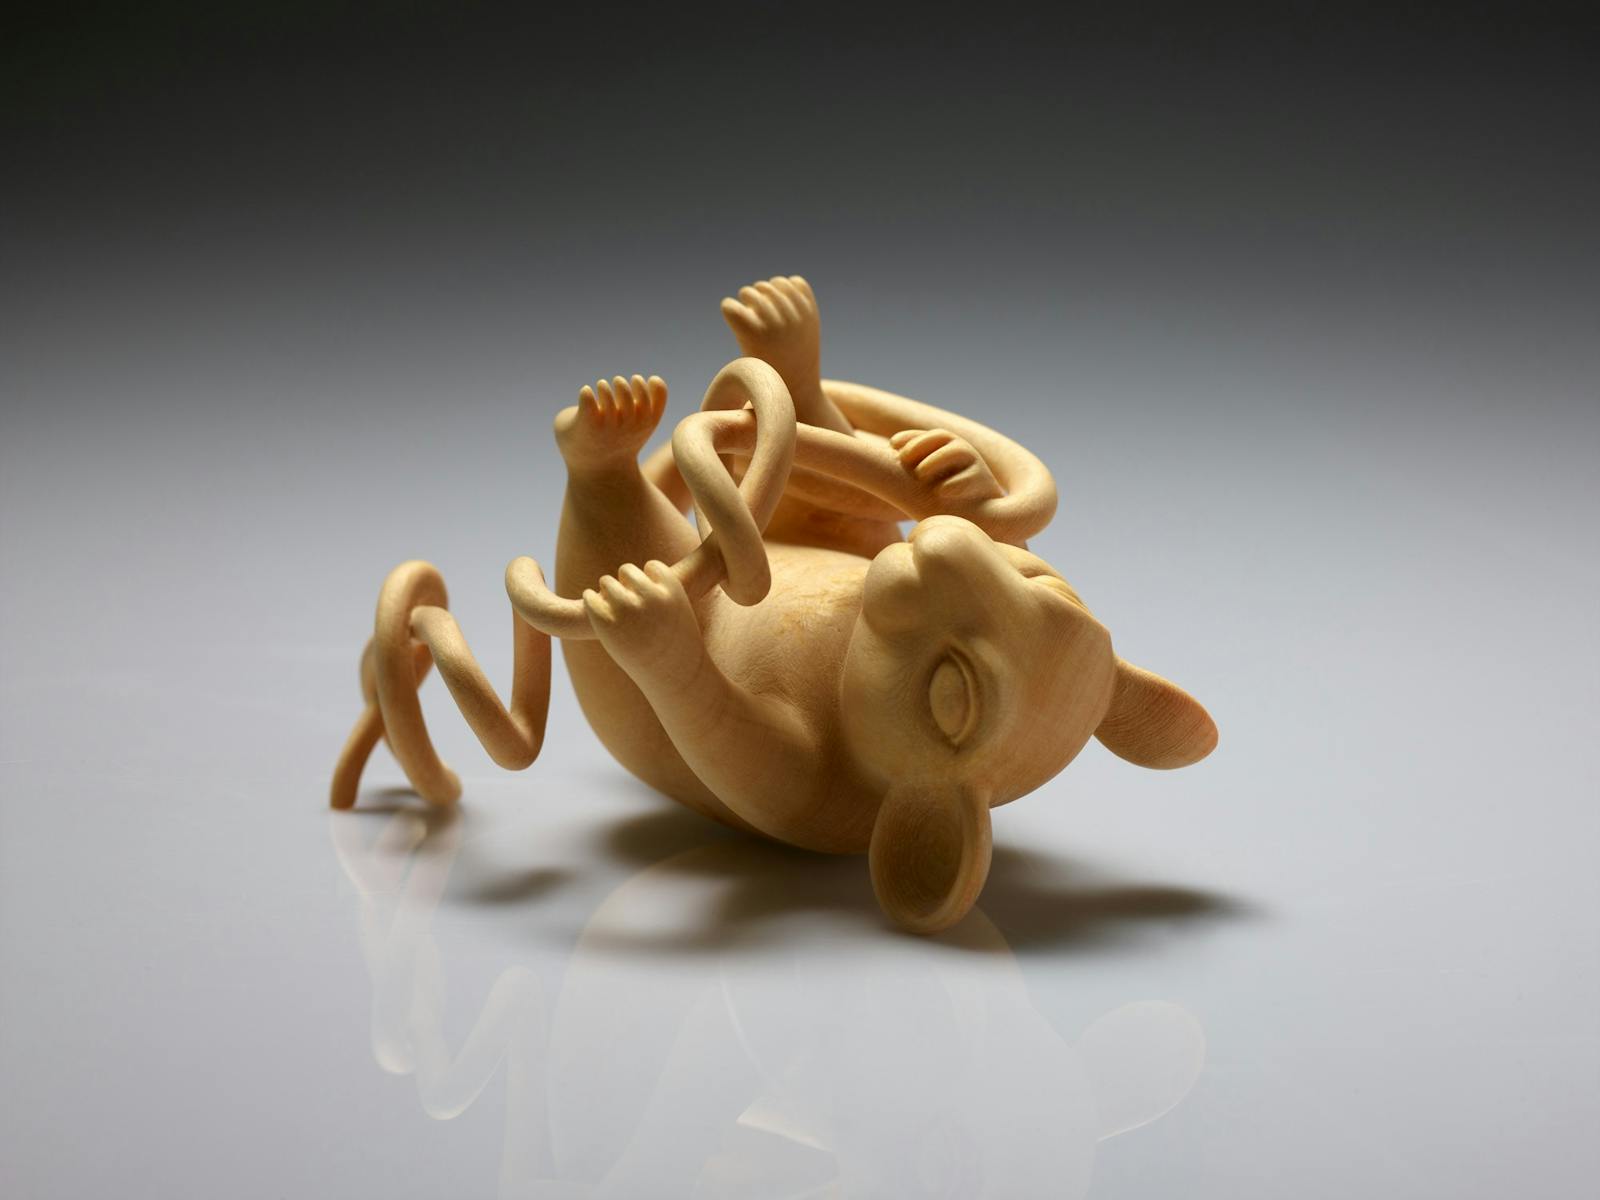 QVMAG's Making Space celebrates carving and includes pieces from Hobart artist Chi Ling Tabart.